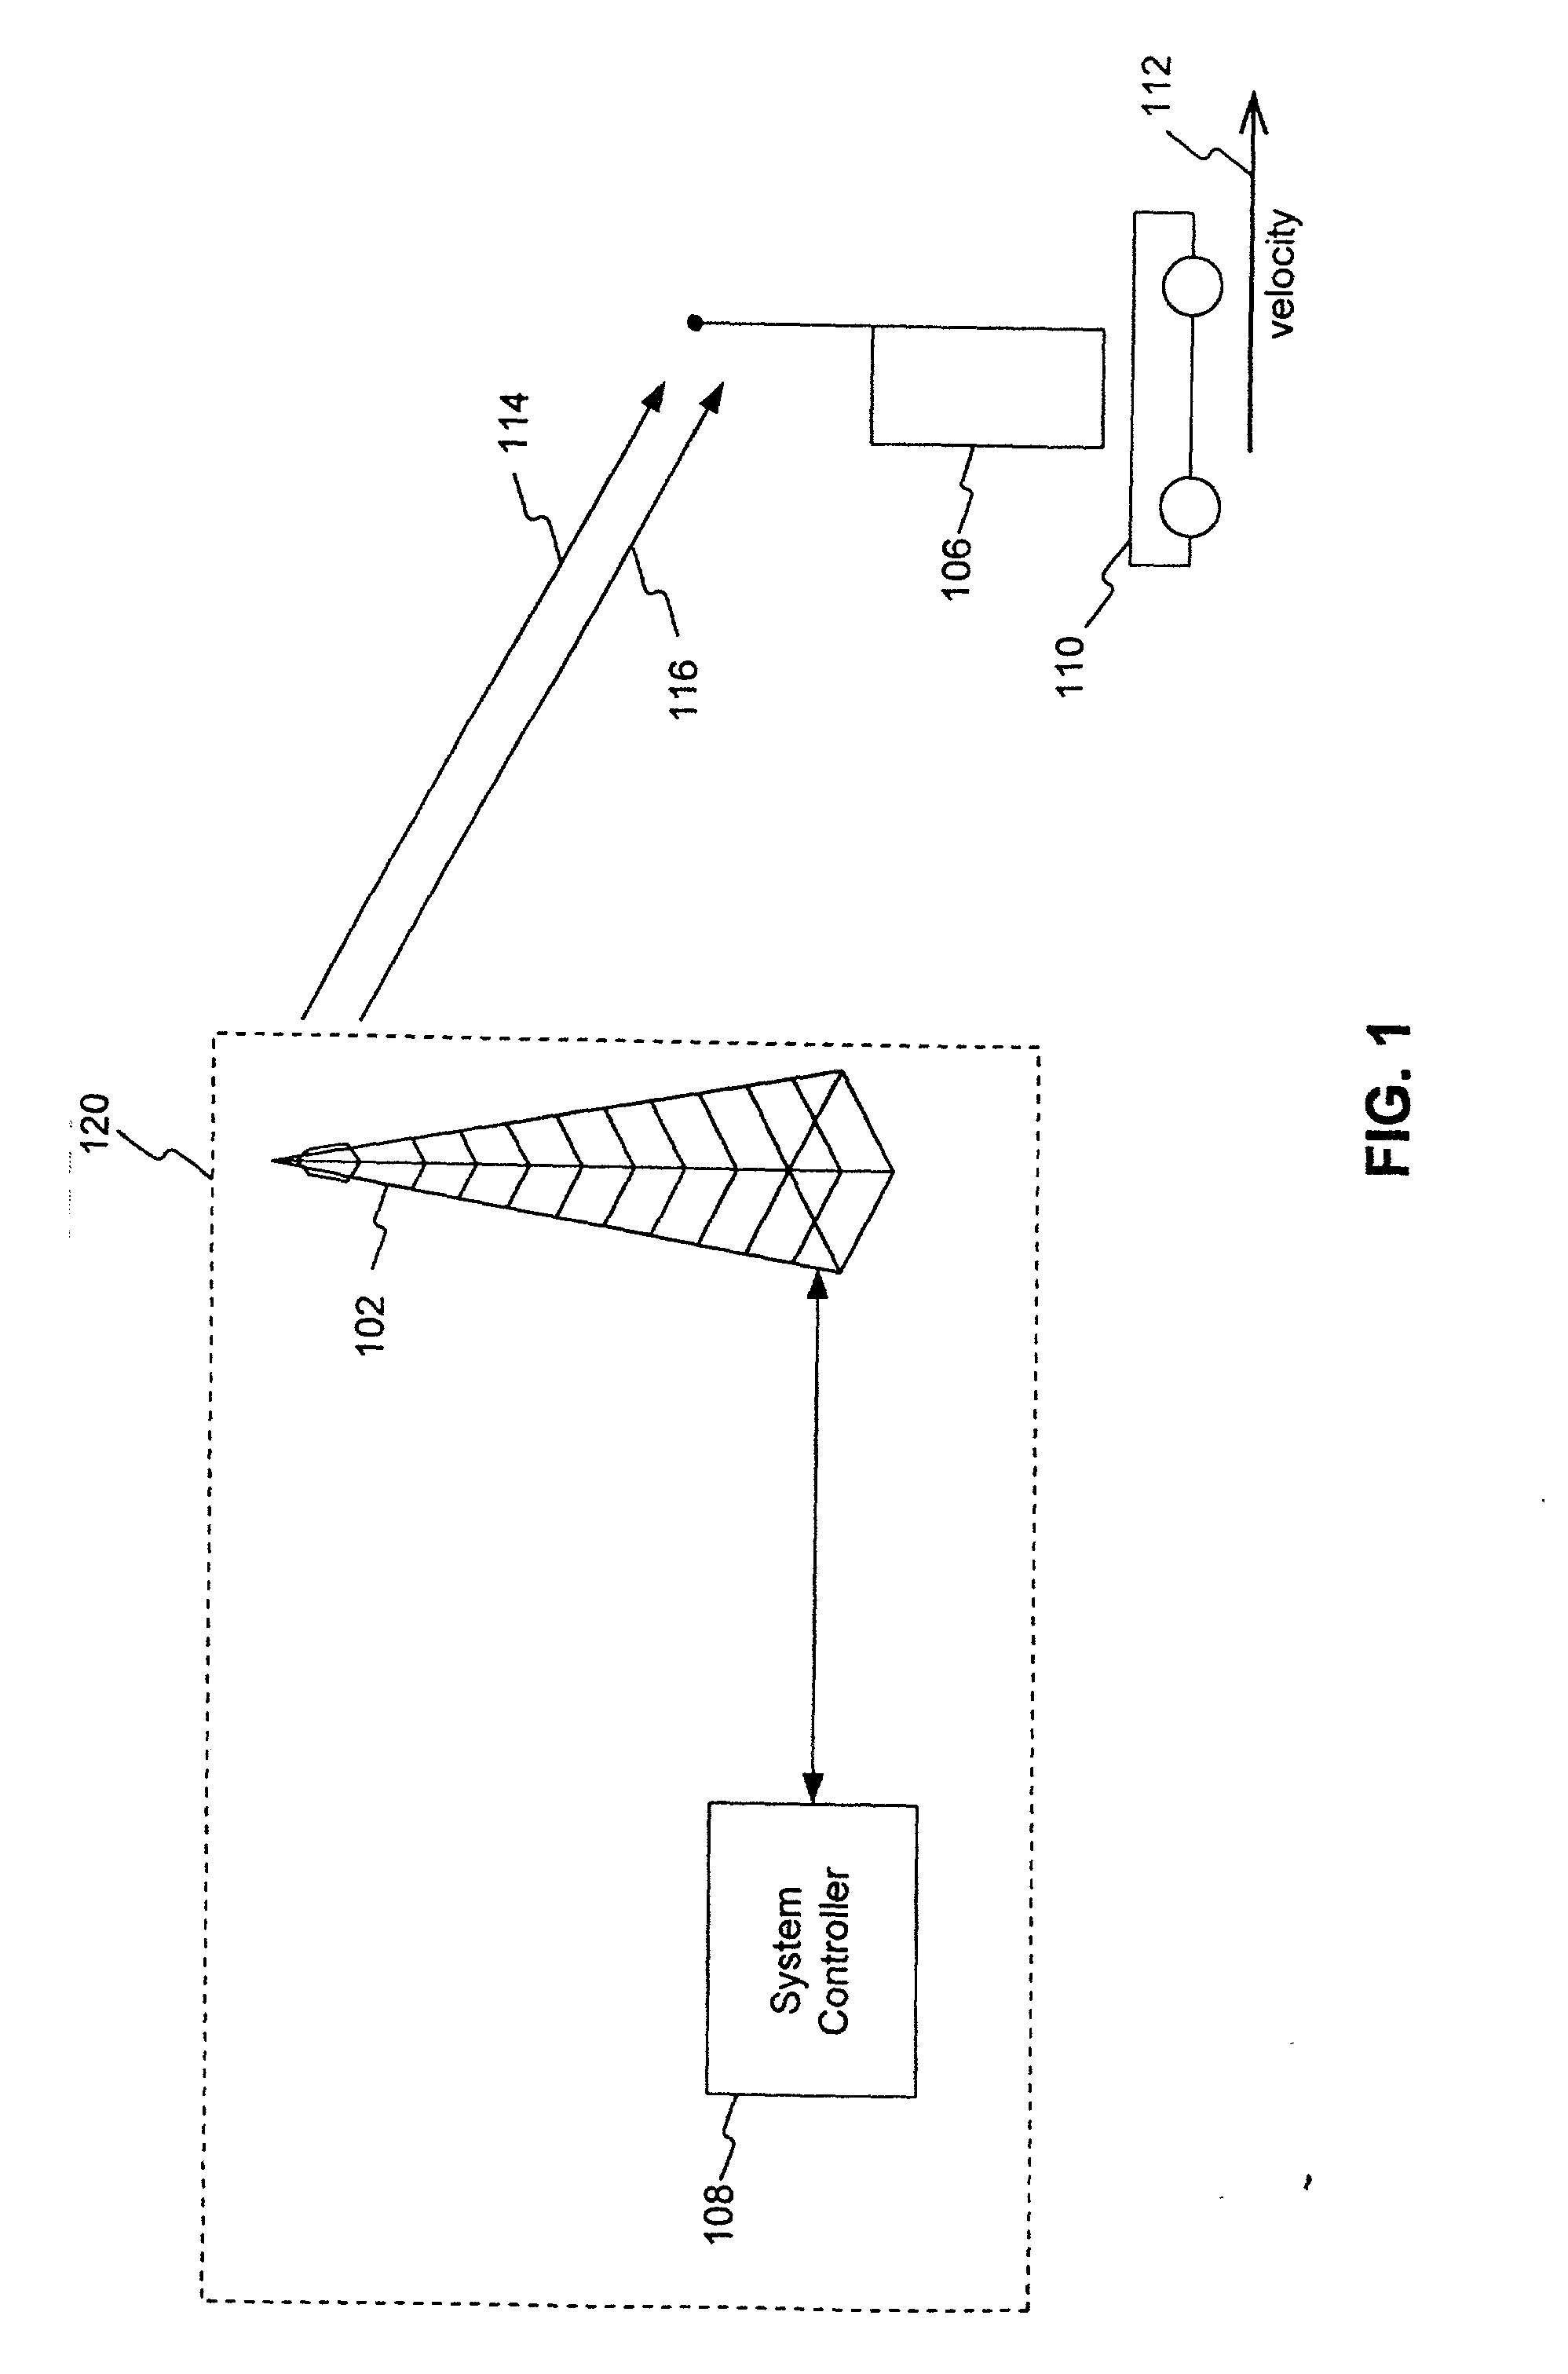 Velocity responsive filtering for pilot signal reception